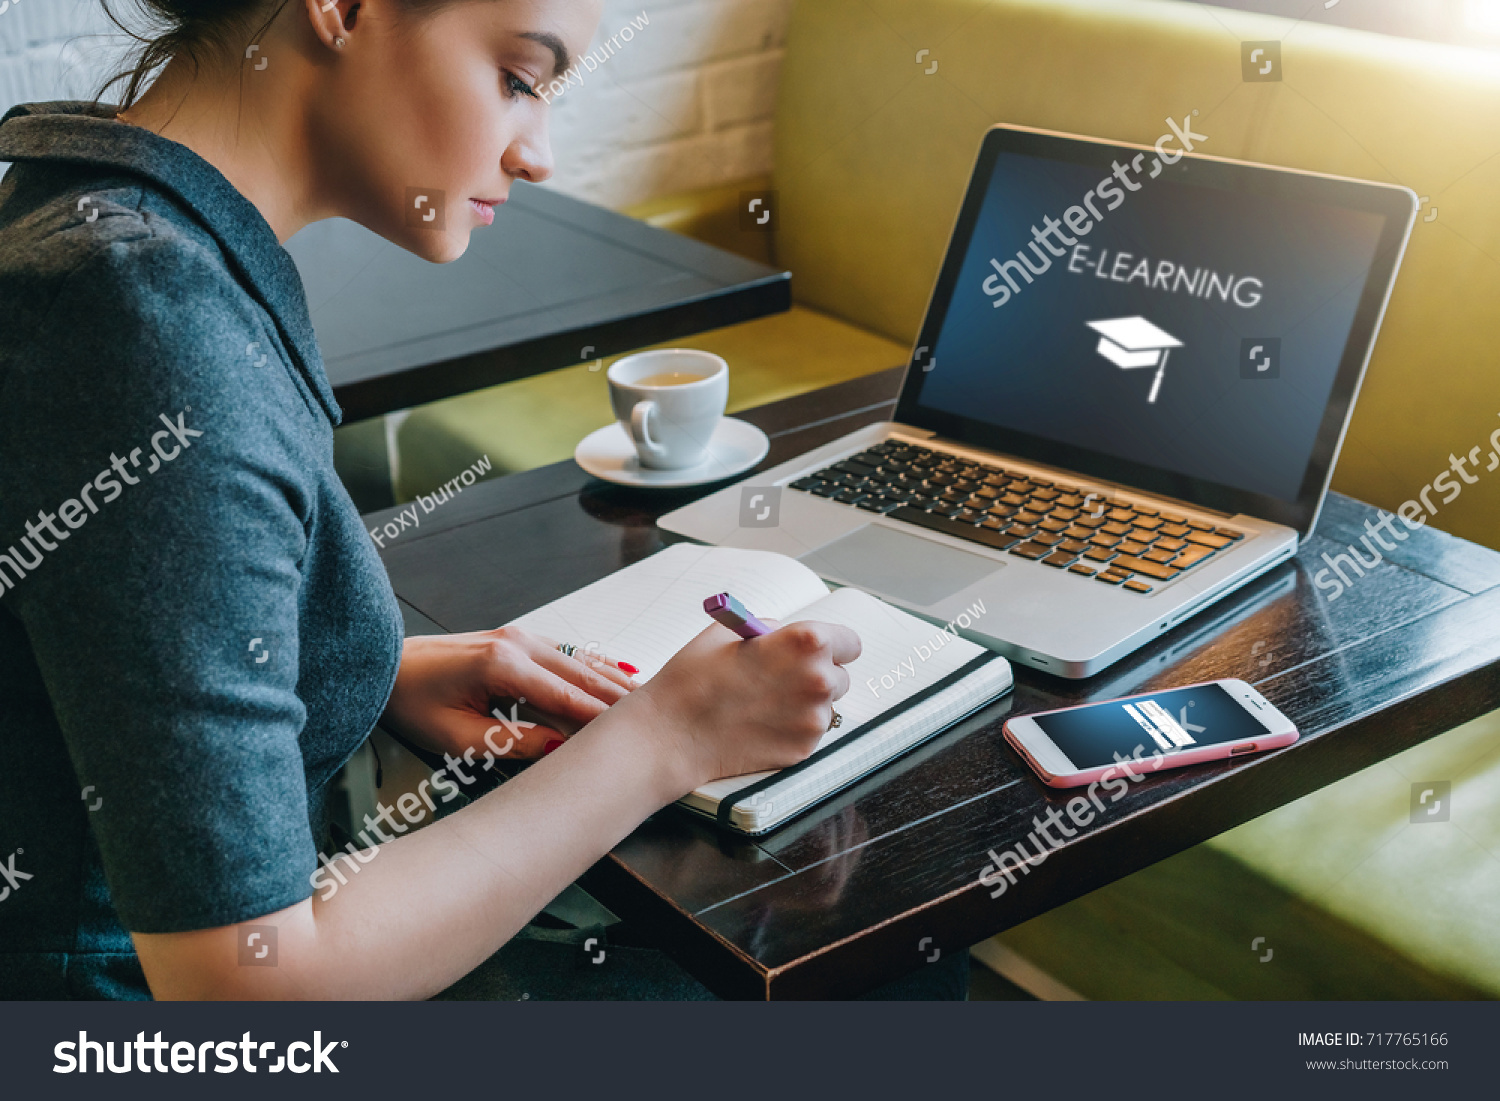 Young businesswoman sitting at table in cafe in front of laptop with inscription on screen e-learning and image of square academic cap and making notes in notebook,diary. Online education,e-learning. #717765166